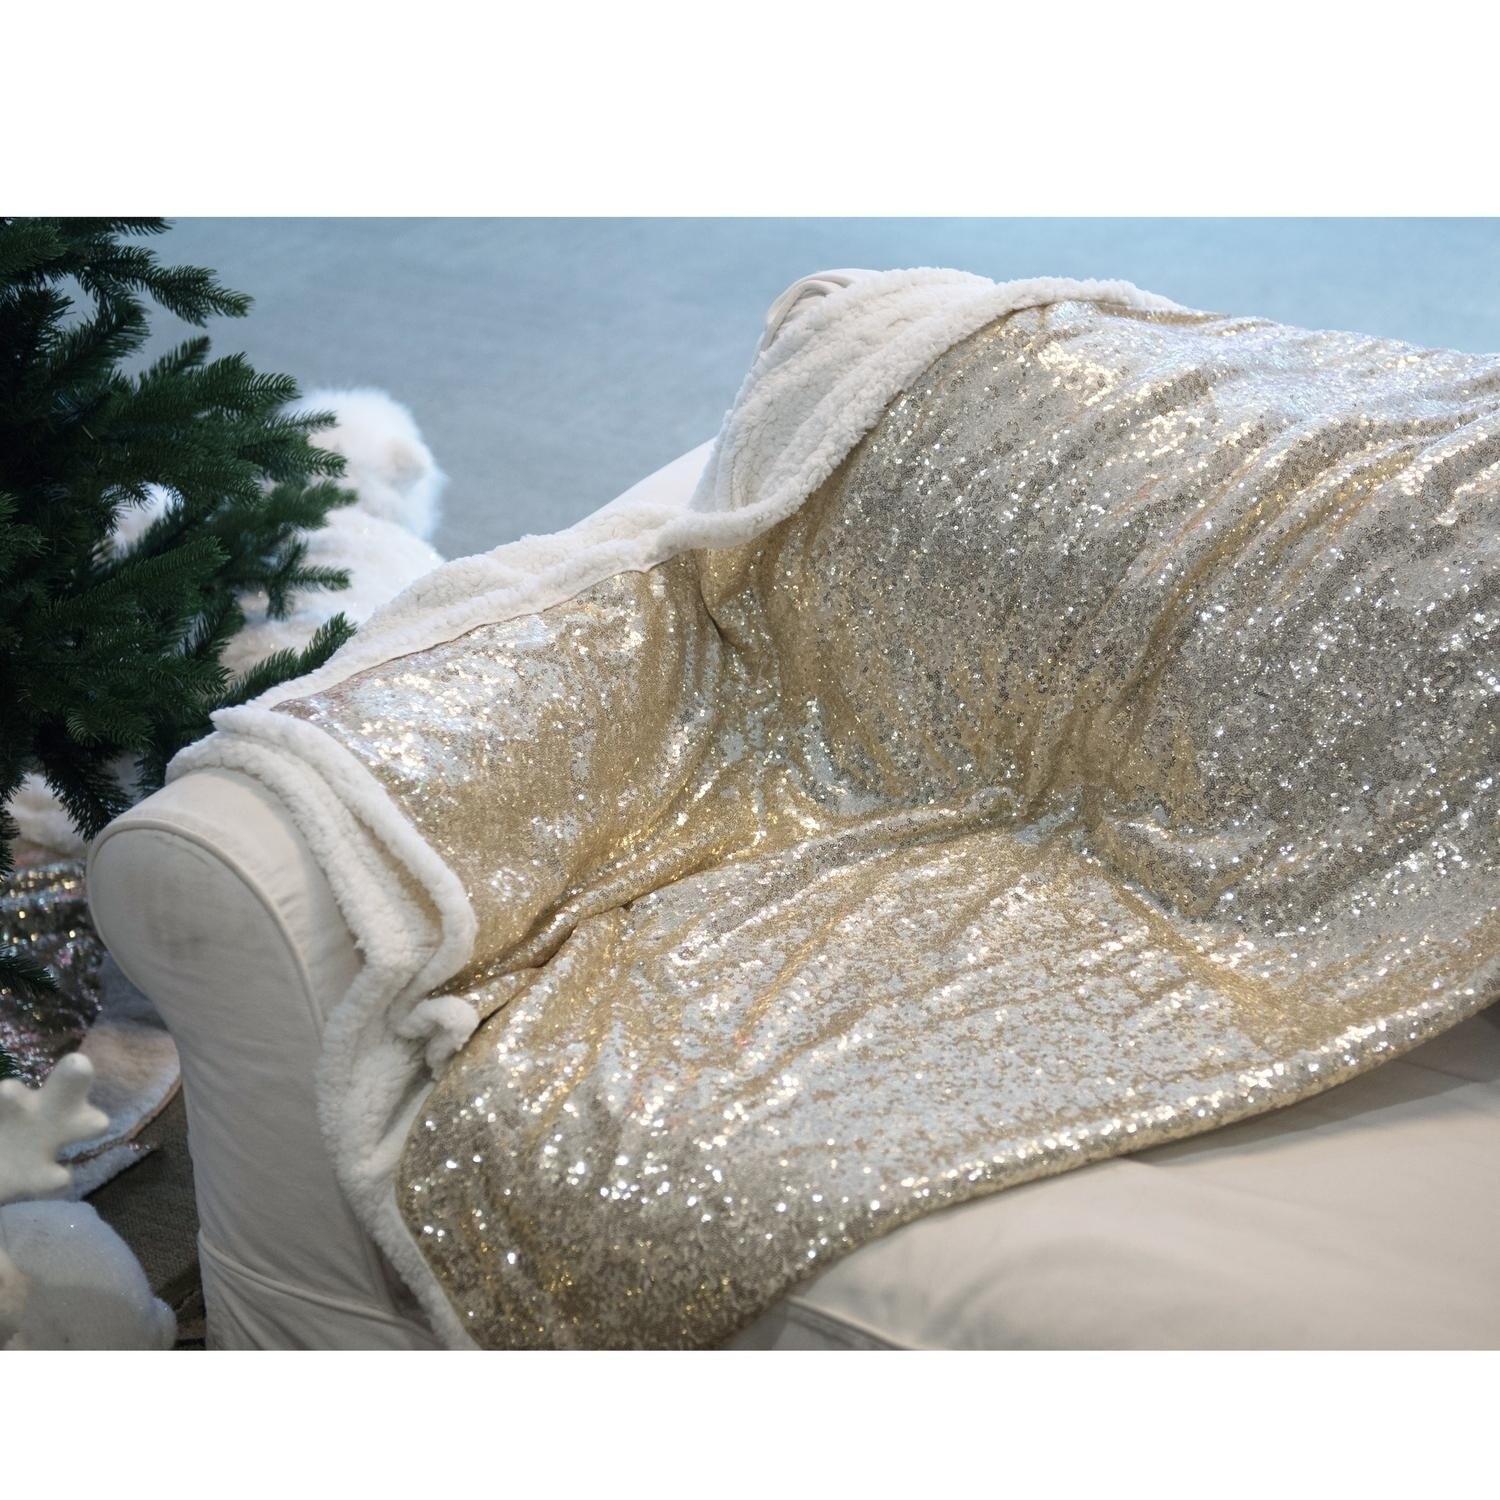 Glided White Christmas Glittering Gold And White Throw Blanket 49 X 67 Overstock 22997046